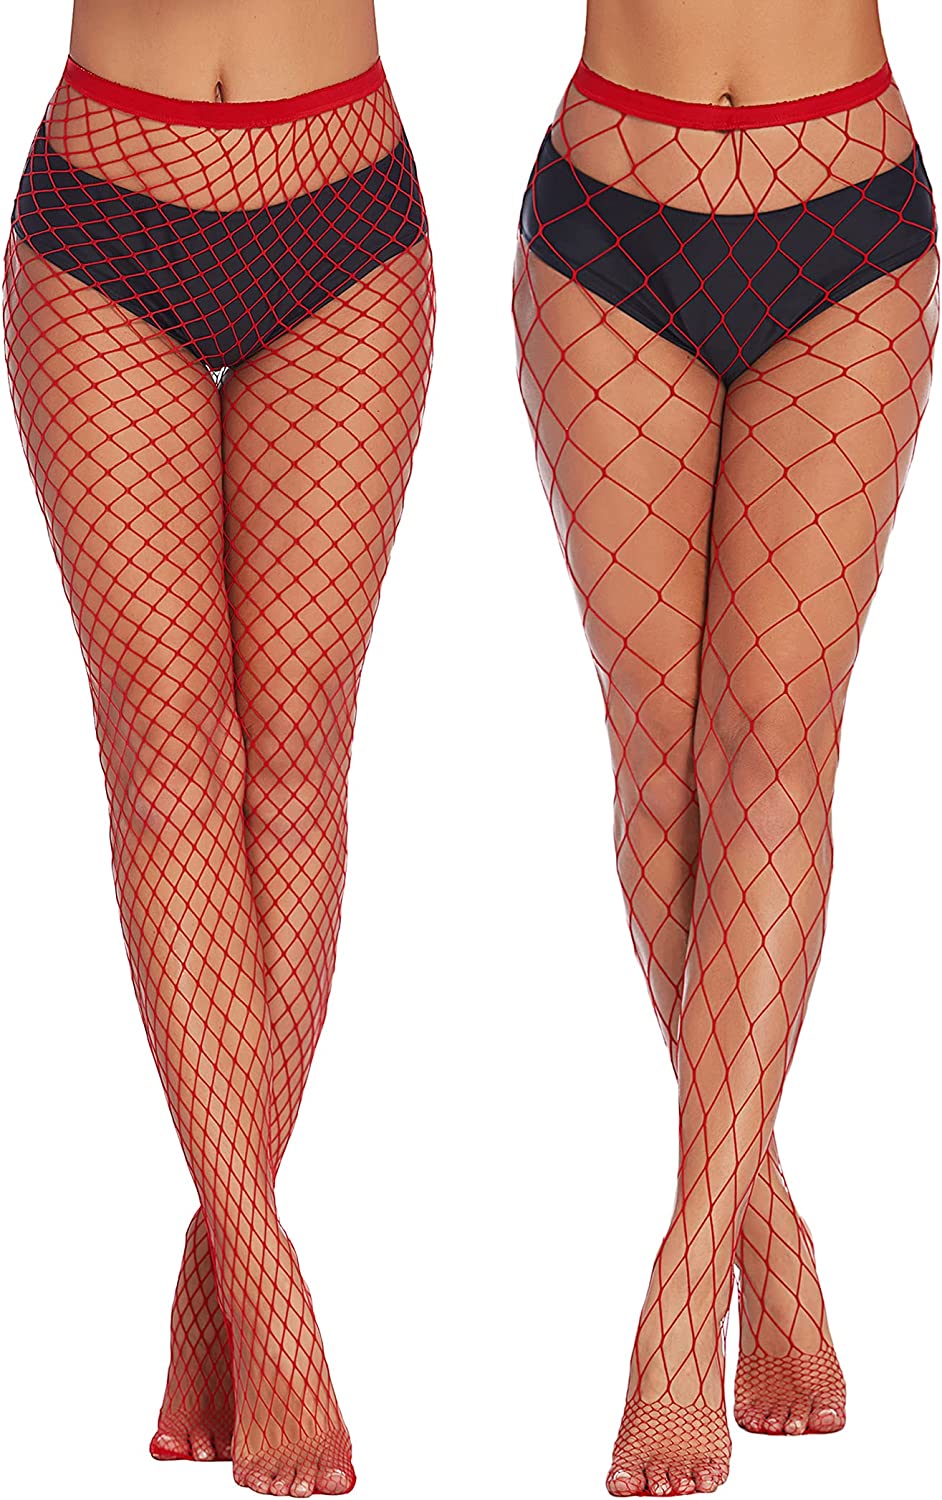 Avidlove Fishnet Thigh Highs Plus Size Fishnet Stockings Pantyhose for Tights